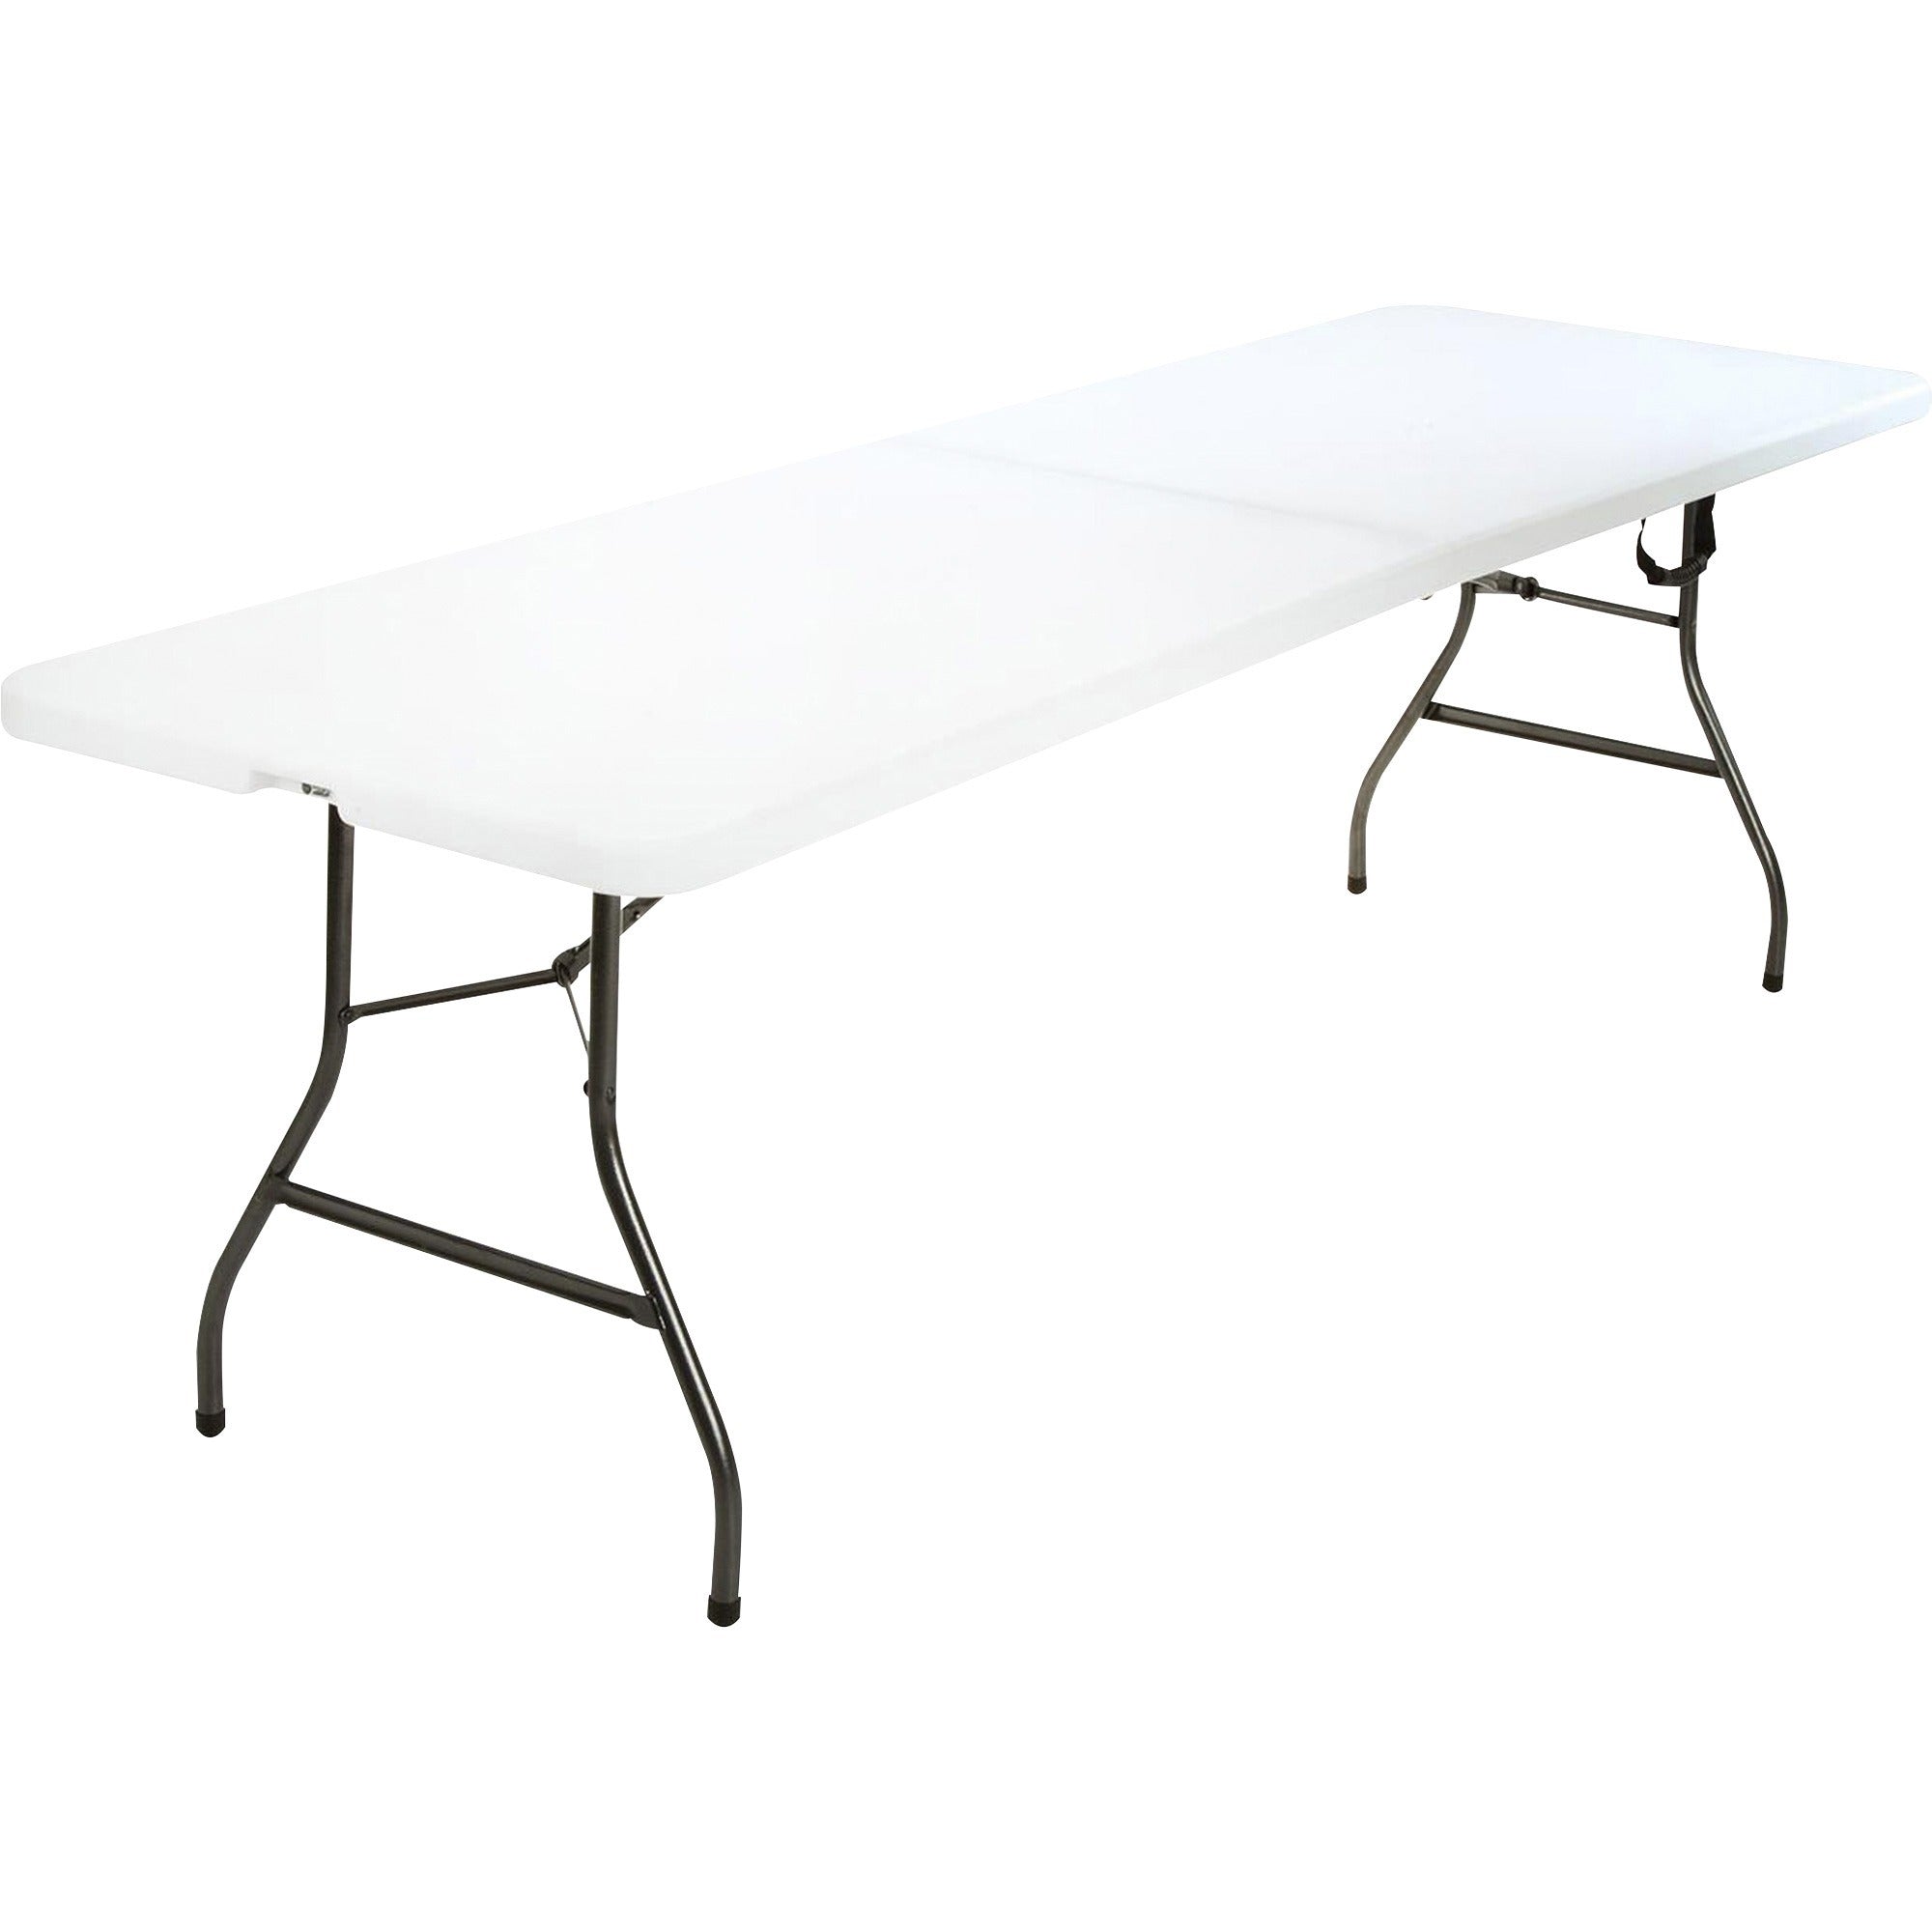 cosco-fold-in-half-blow-molded-table-for-table-toprectangle-top-four-leg-base-4-legs-300-lb-capacity-x-30-table-top-width-x-96-table-top-depth-2925-height-white-1-each_csc14778wsl1x - 1